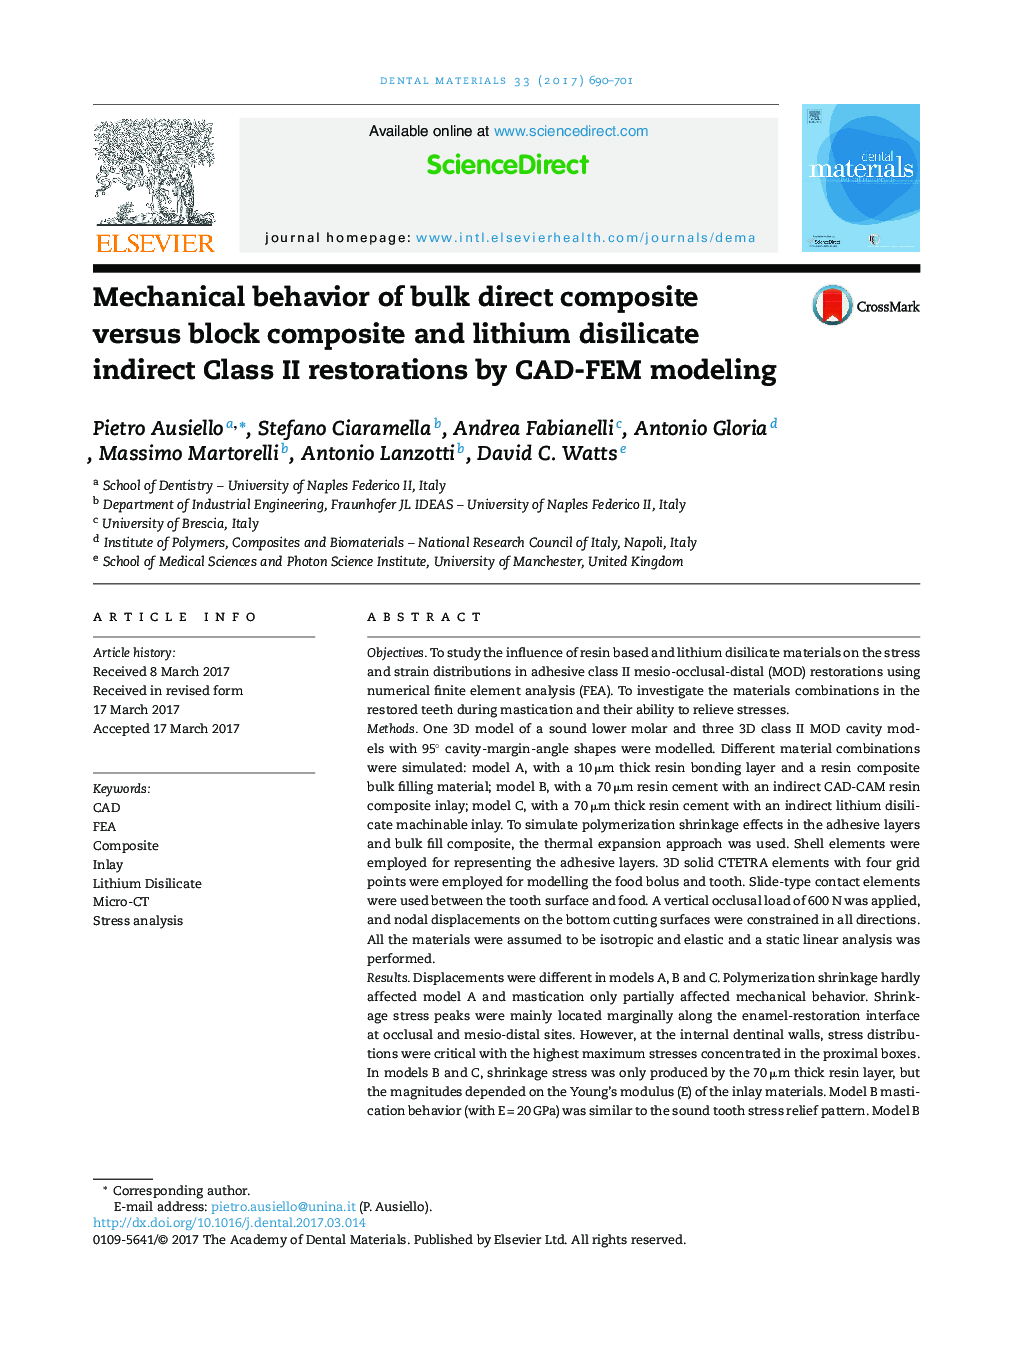 Mechanical behavior of bulk direct composite versus block composite and lithium disilicate indirect Class II restorations by CAD-FEM modeling